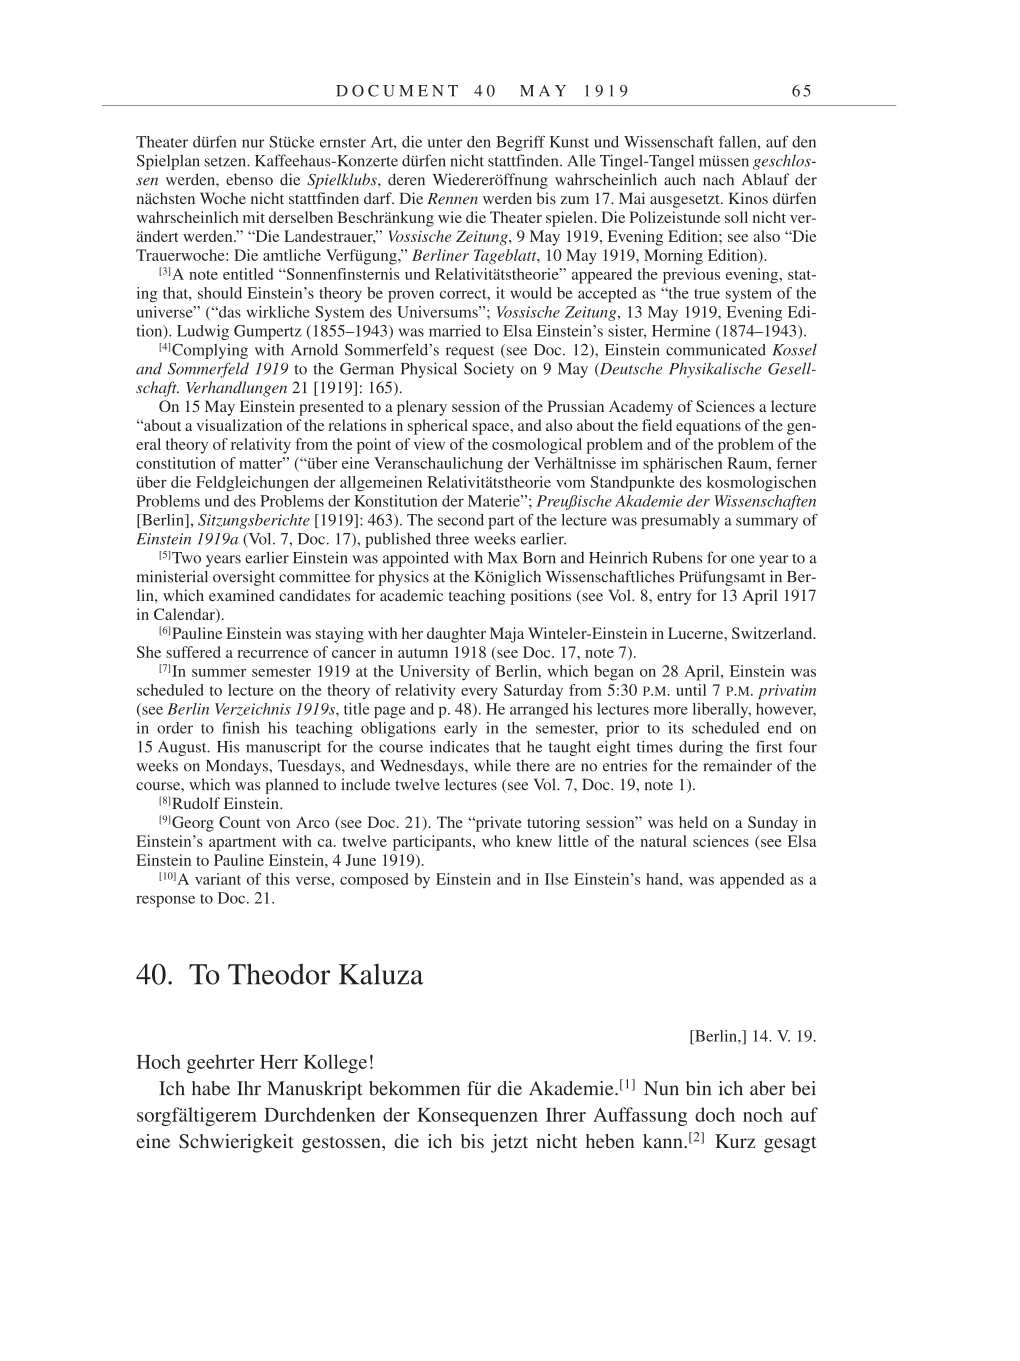 Volume 9: The Berlin Years: Correspondence January 1919-April 1920 page 65